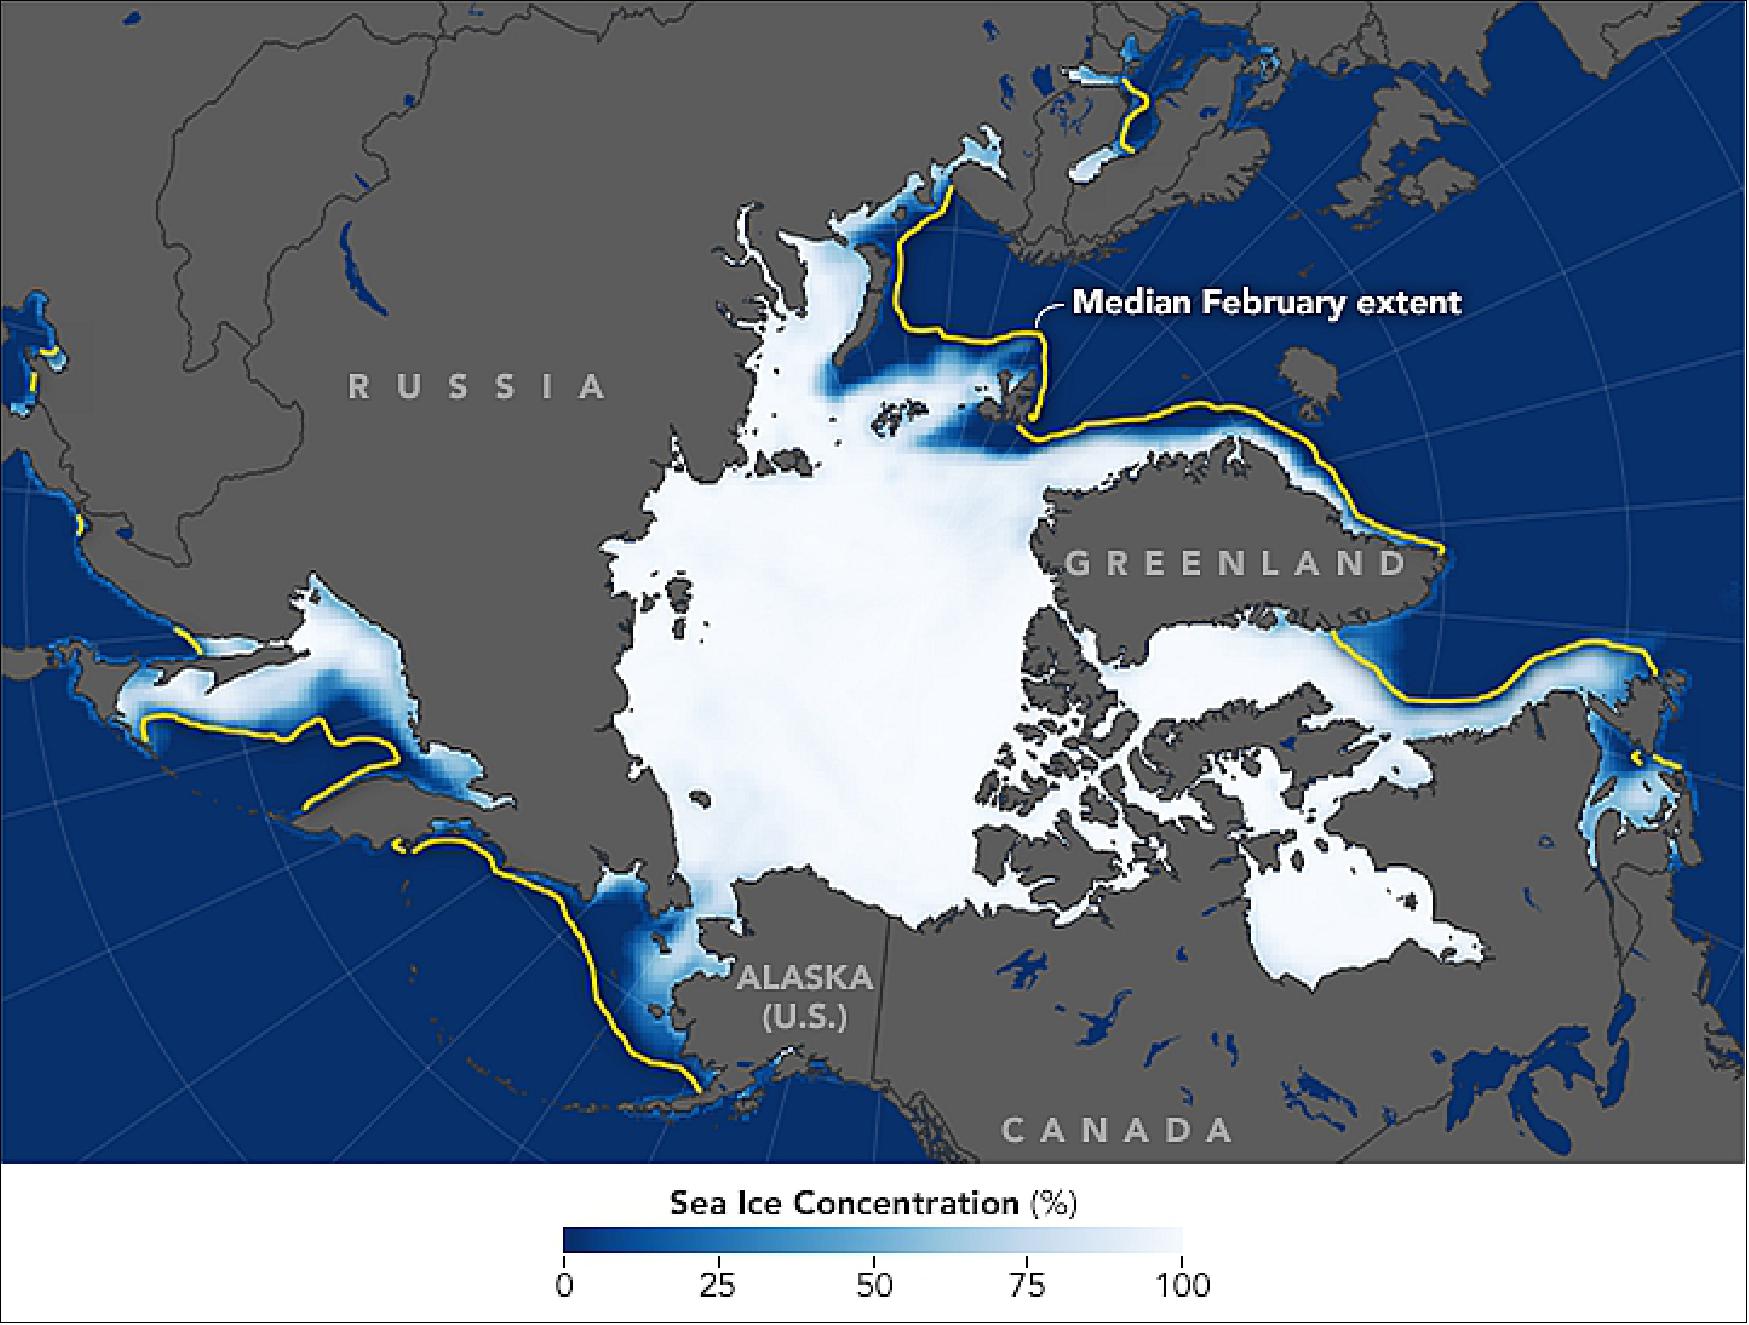 Figure 31: Map of the average concentration of Arctic sea ice, acquired in February 2018 (image credit: NASA Earth Observatory, images by Joshua Stevens, using data from the NSIDC and NCEP reanalysis data provided by the NOAA/OAR/ESRL PSD. Story by Kathryn Hansen with reporting by Maria-José Viñas/NASA’s Earth Science News Team)